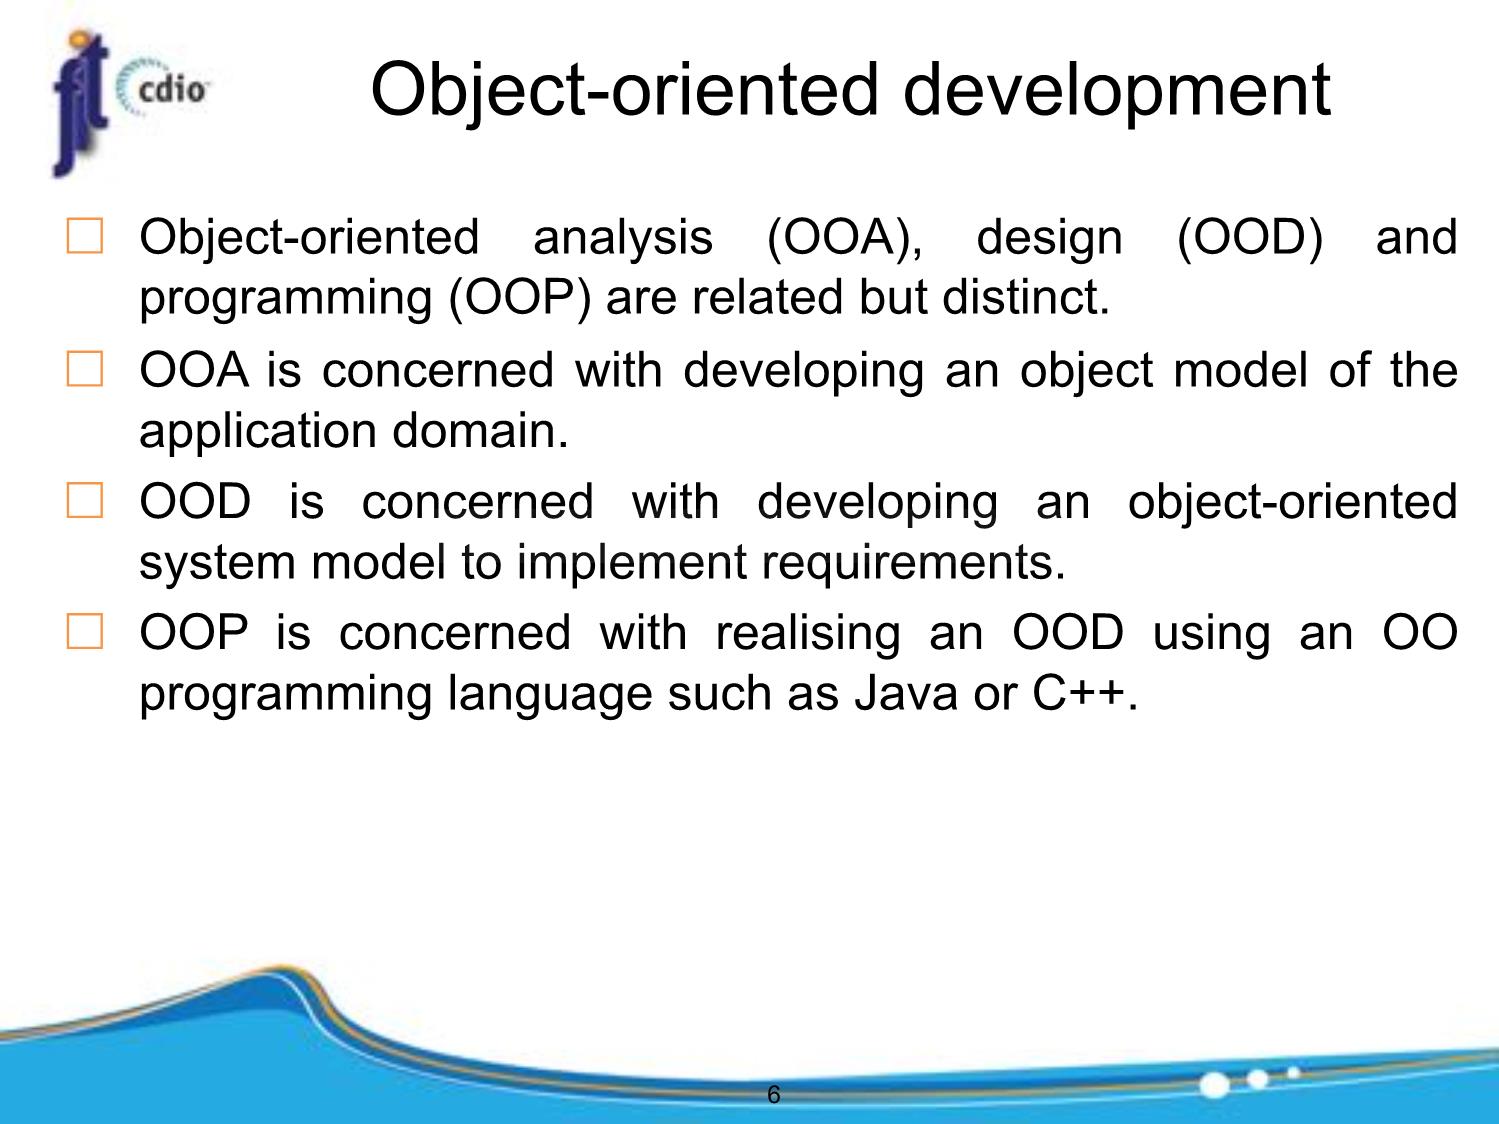 Bài giảng Introduction to Software Engineering - Week 7: Object-Oriented design - Nguyễn Thị Minh Tuyền trang 6